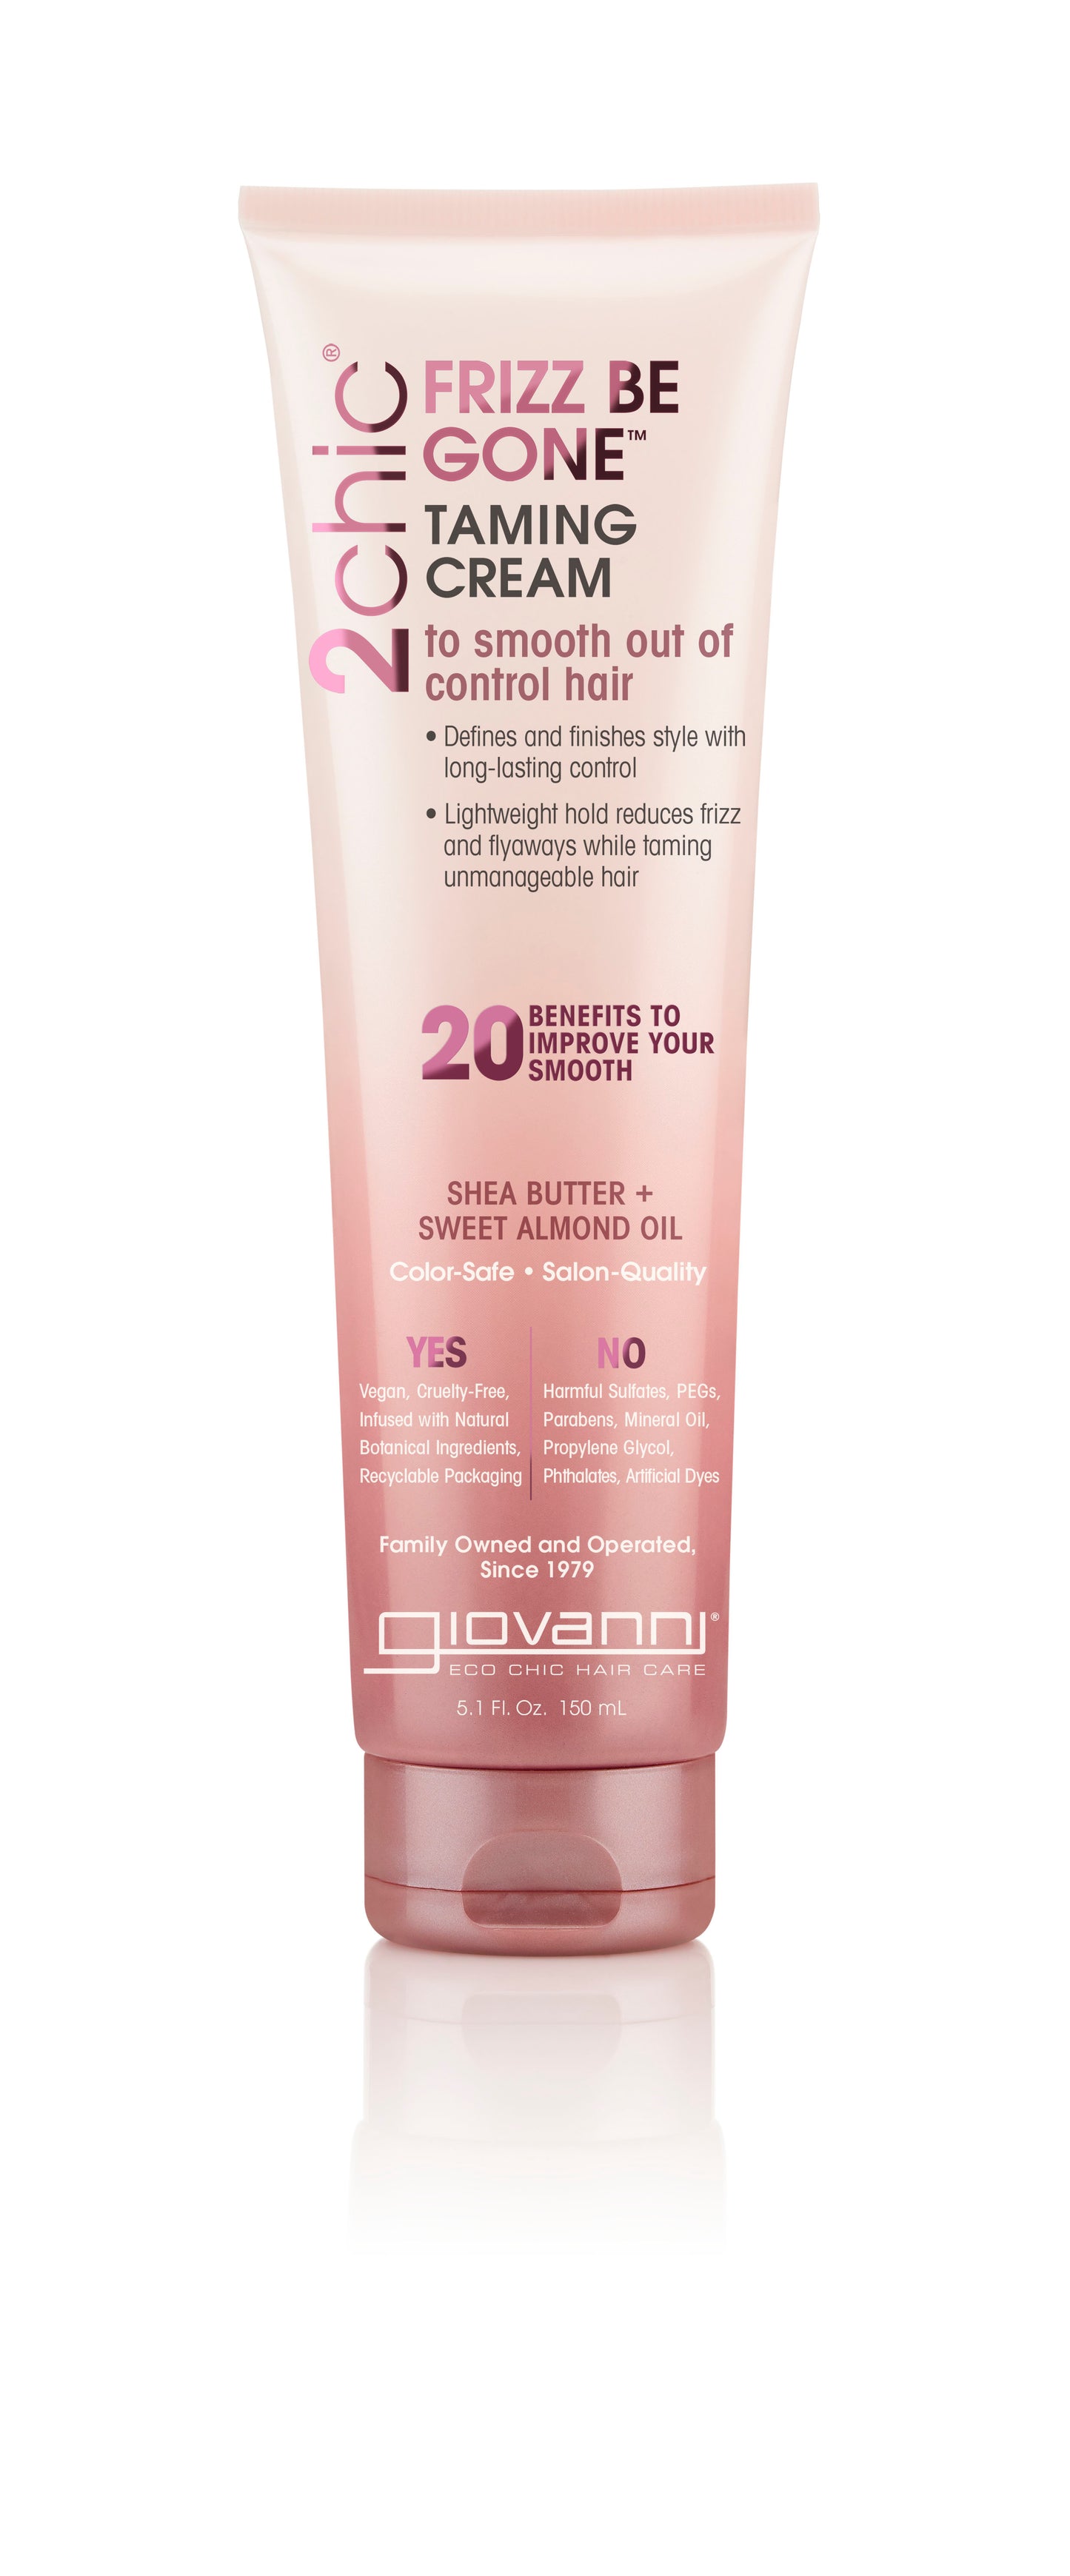 Giovanni 2chic Frizz Be Gone Taming Cream - 150ml